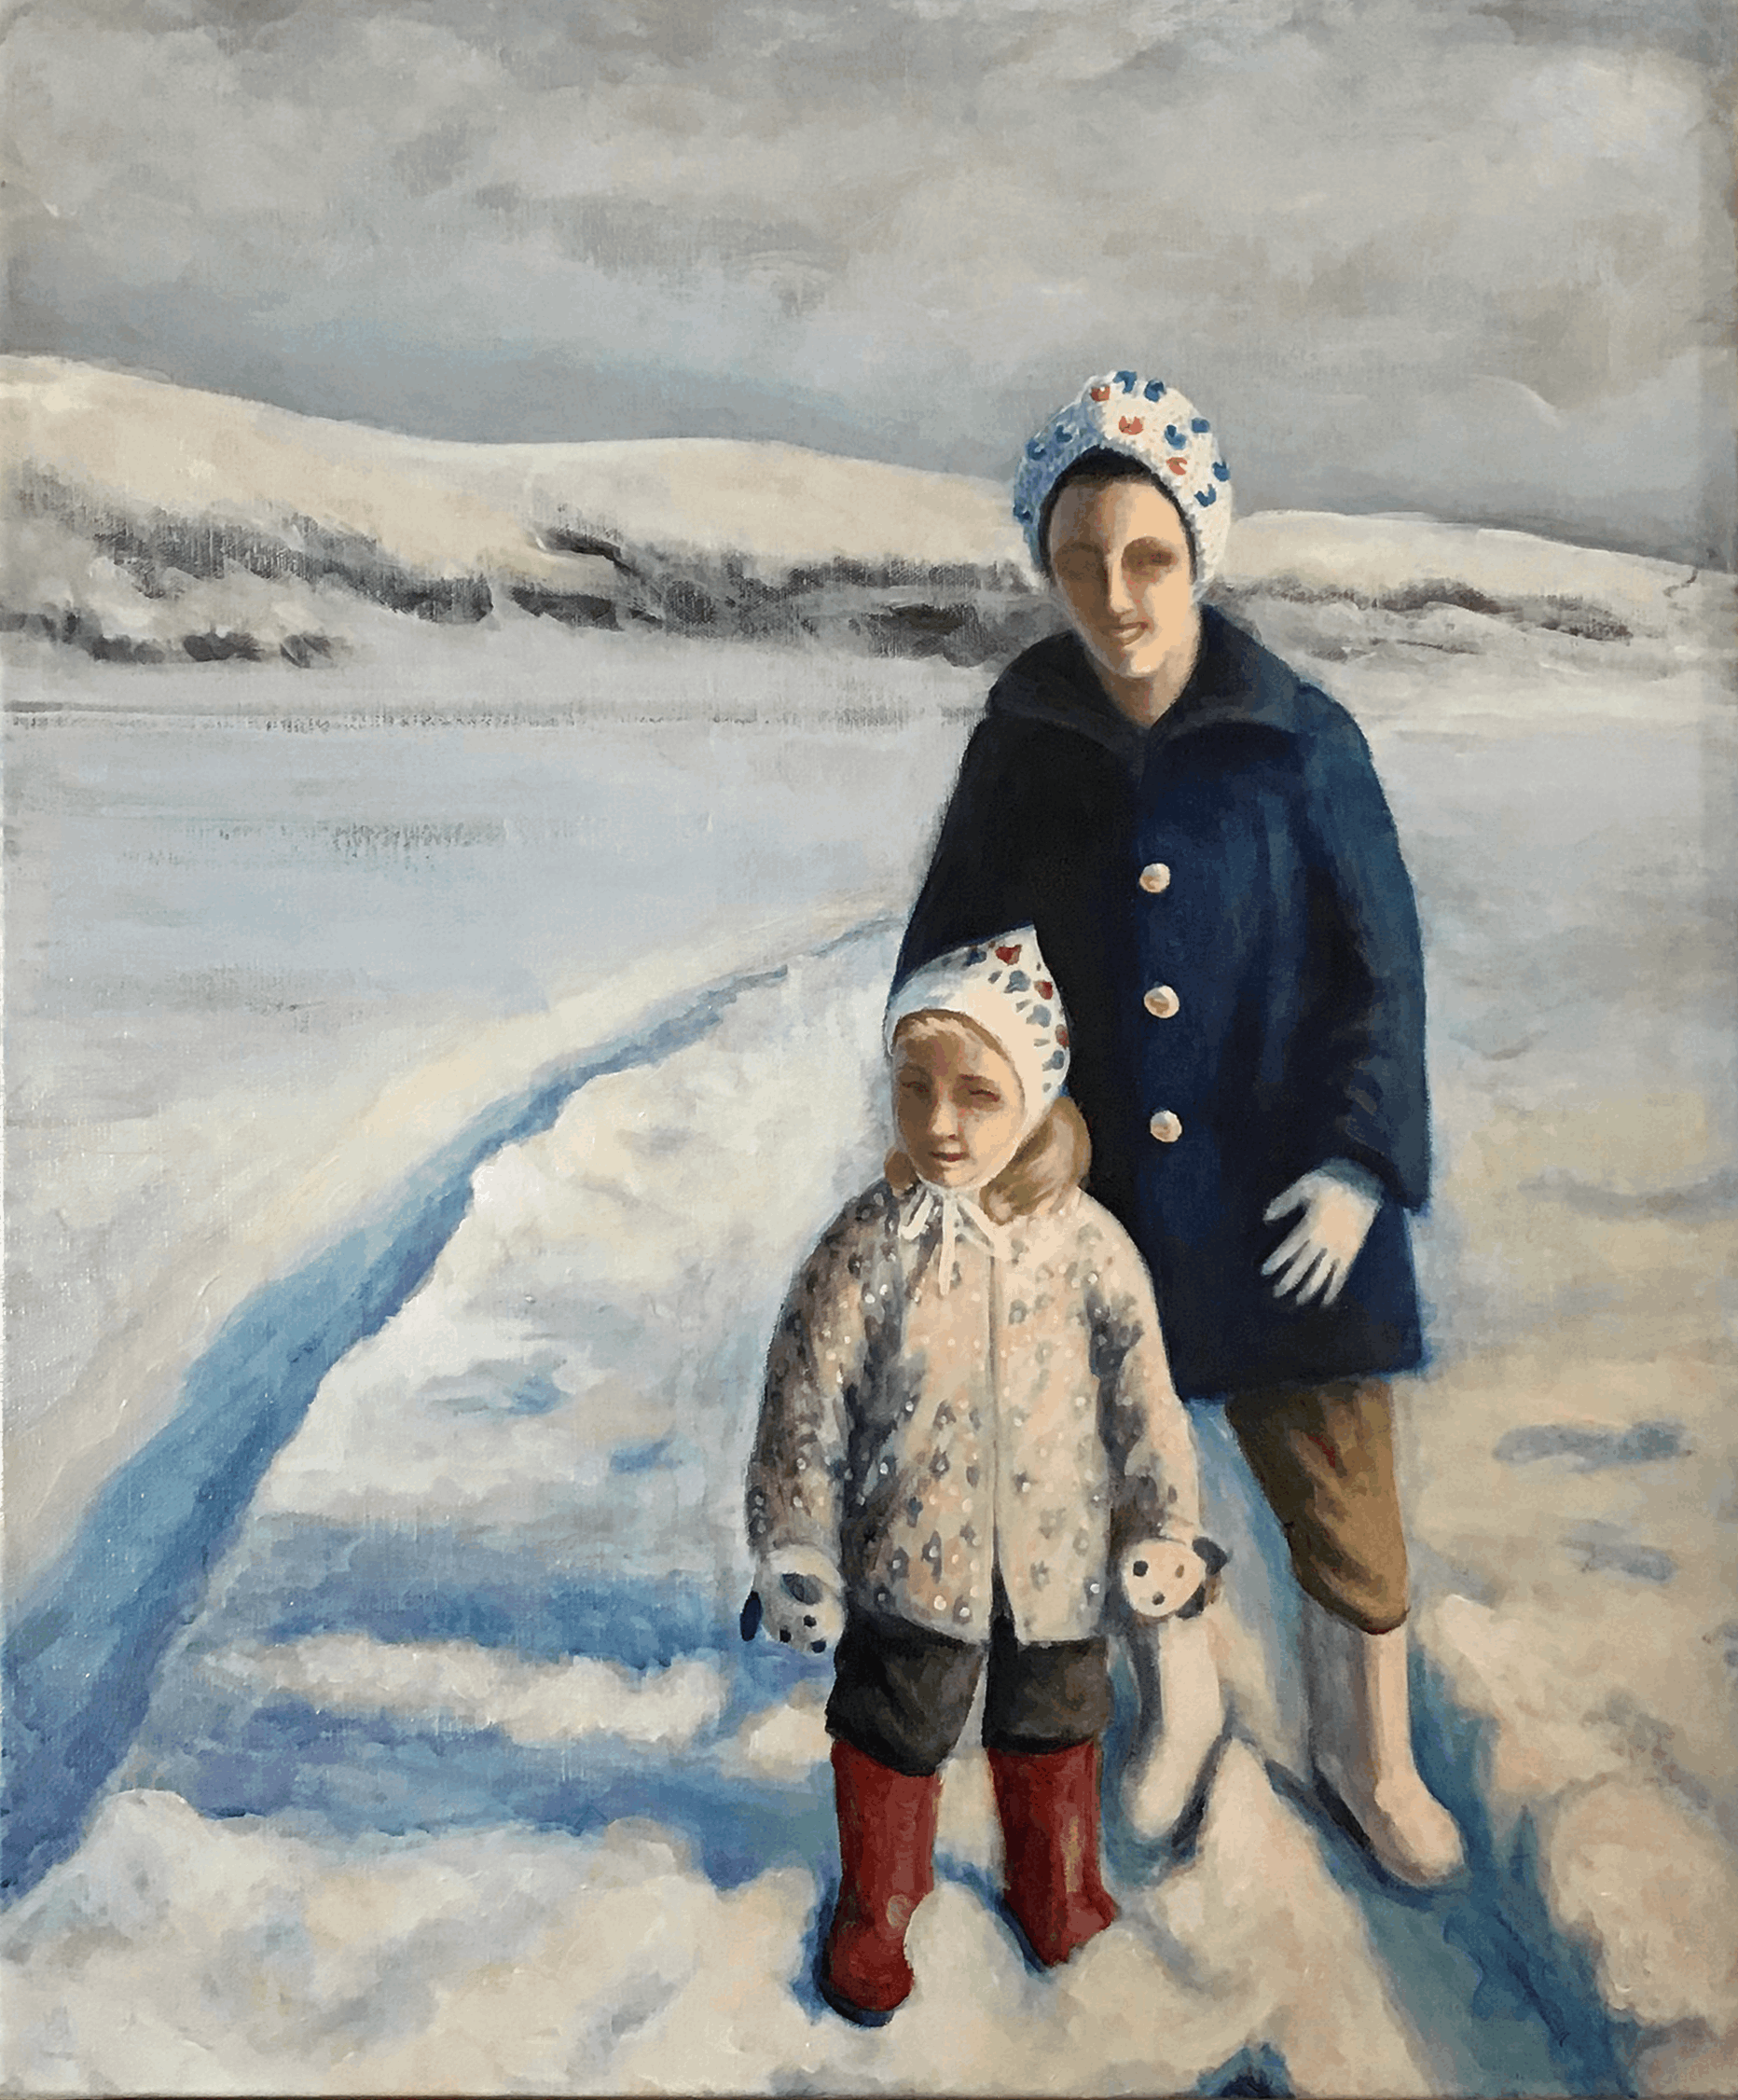 painting of a girl and woman in the snow